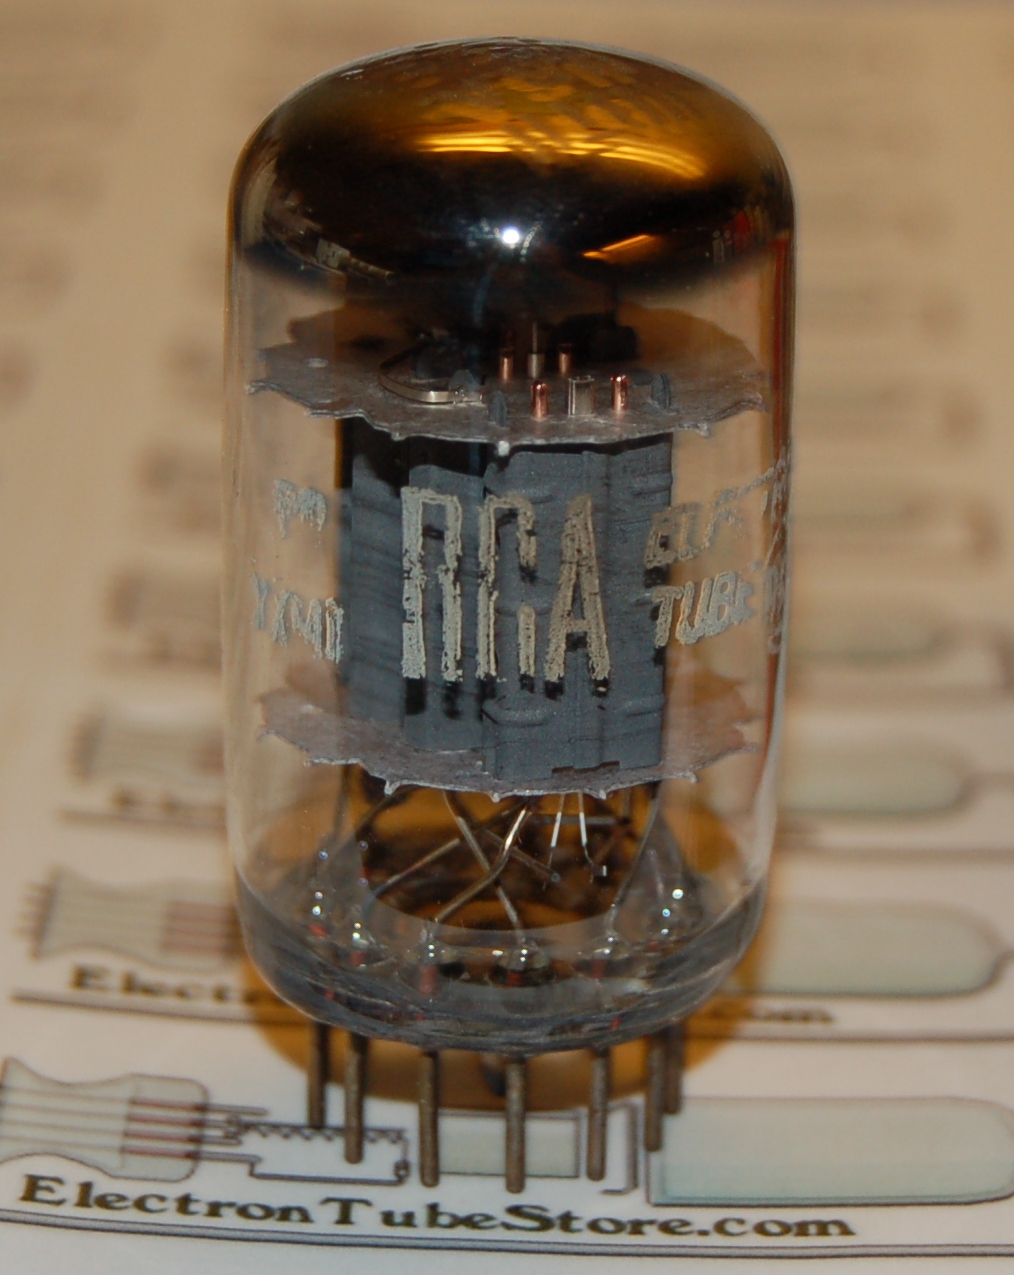 11BT11 double triode and pentode tube - Click Image to Close